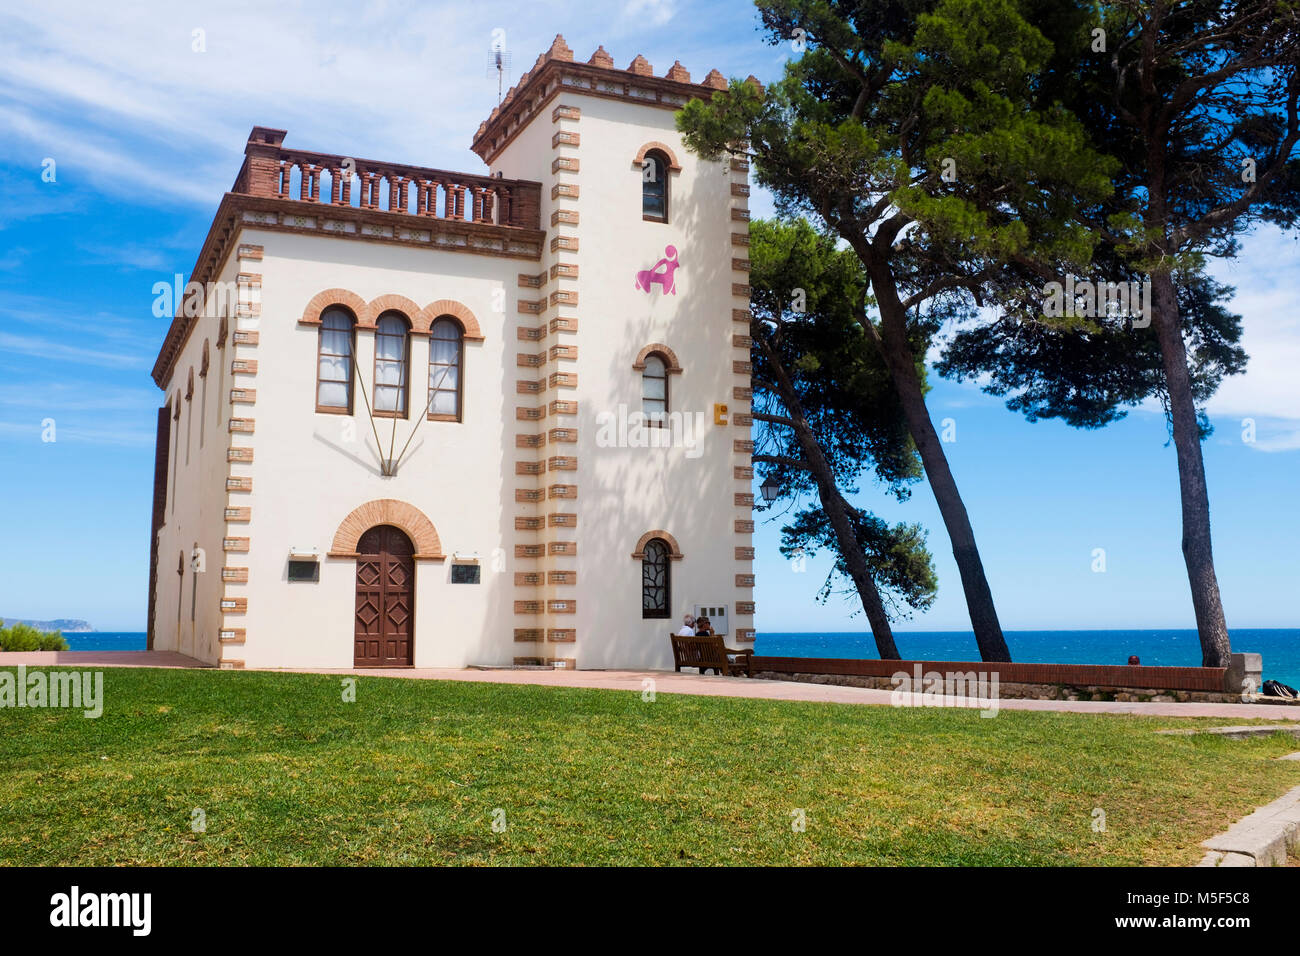 Casa Forestal in Sant Martí d'Empúries, Catalonia. Building for the Hydrological and Forestry Service, constructed in 1910. Stock Photo